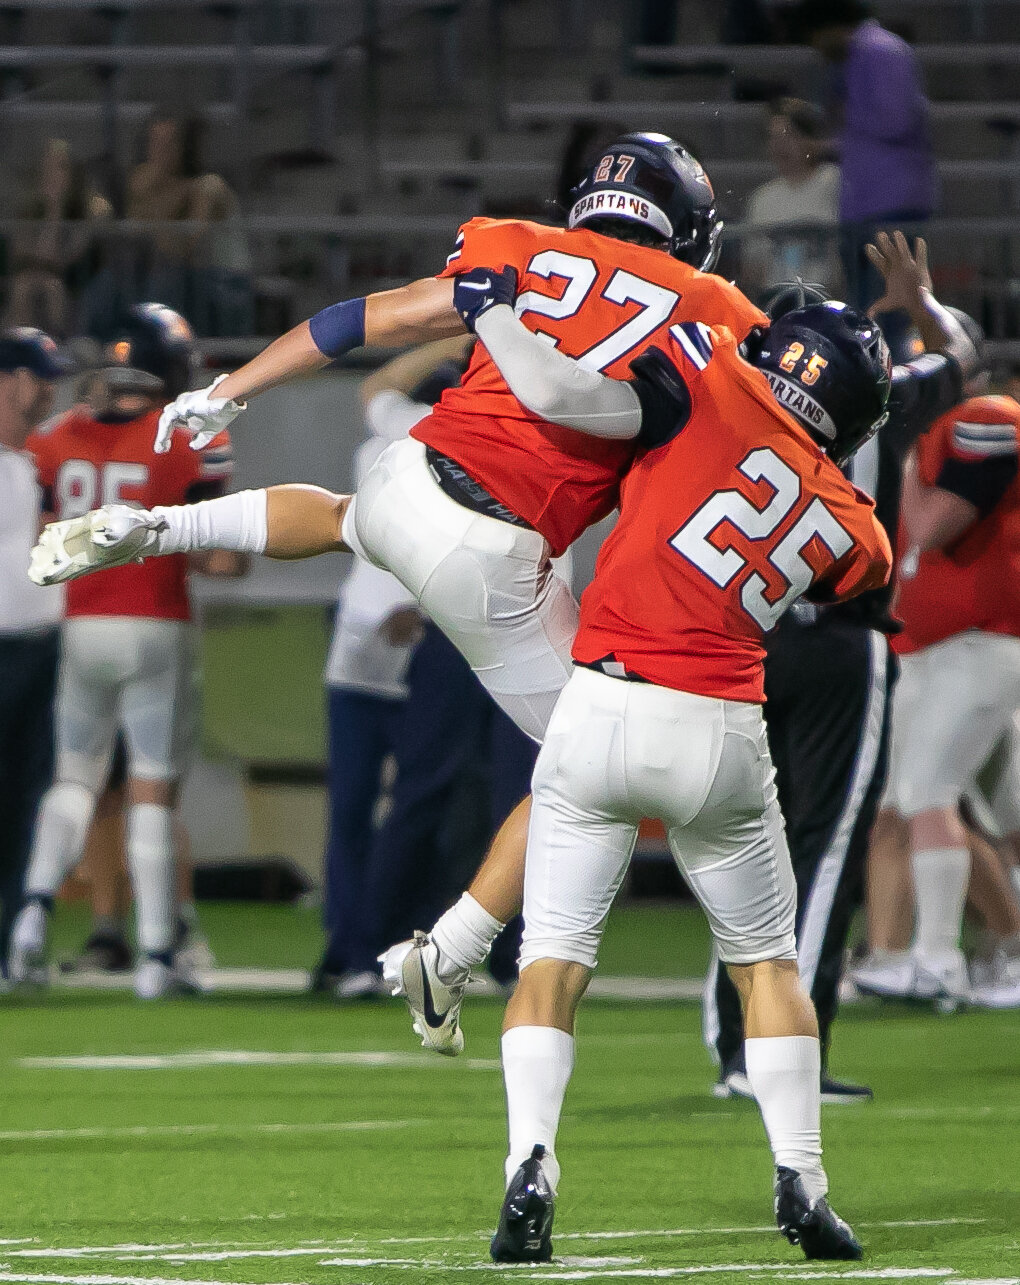 John Paul Anderson and Austin Easterling celebrate during Thursday's game between Seven Lakes and Memorial at Legacy Stadium.